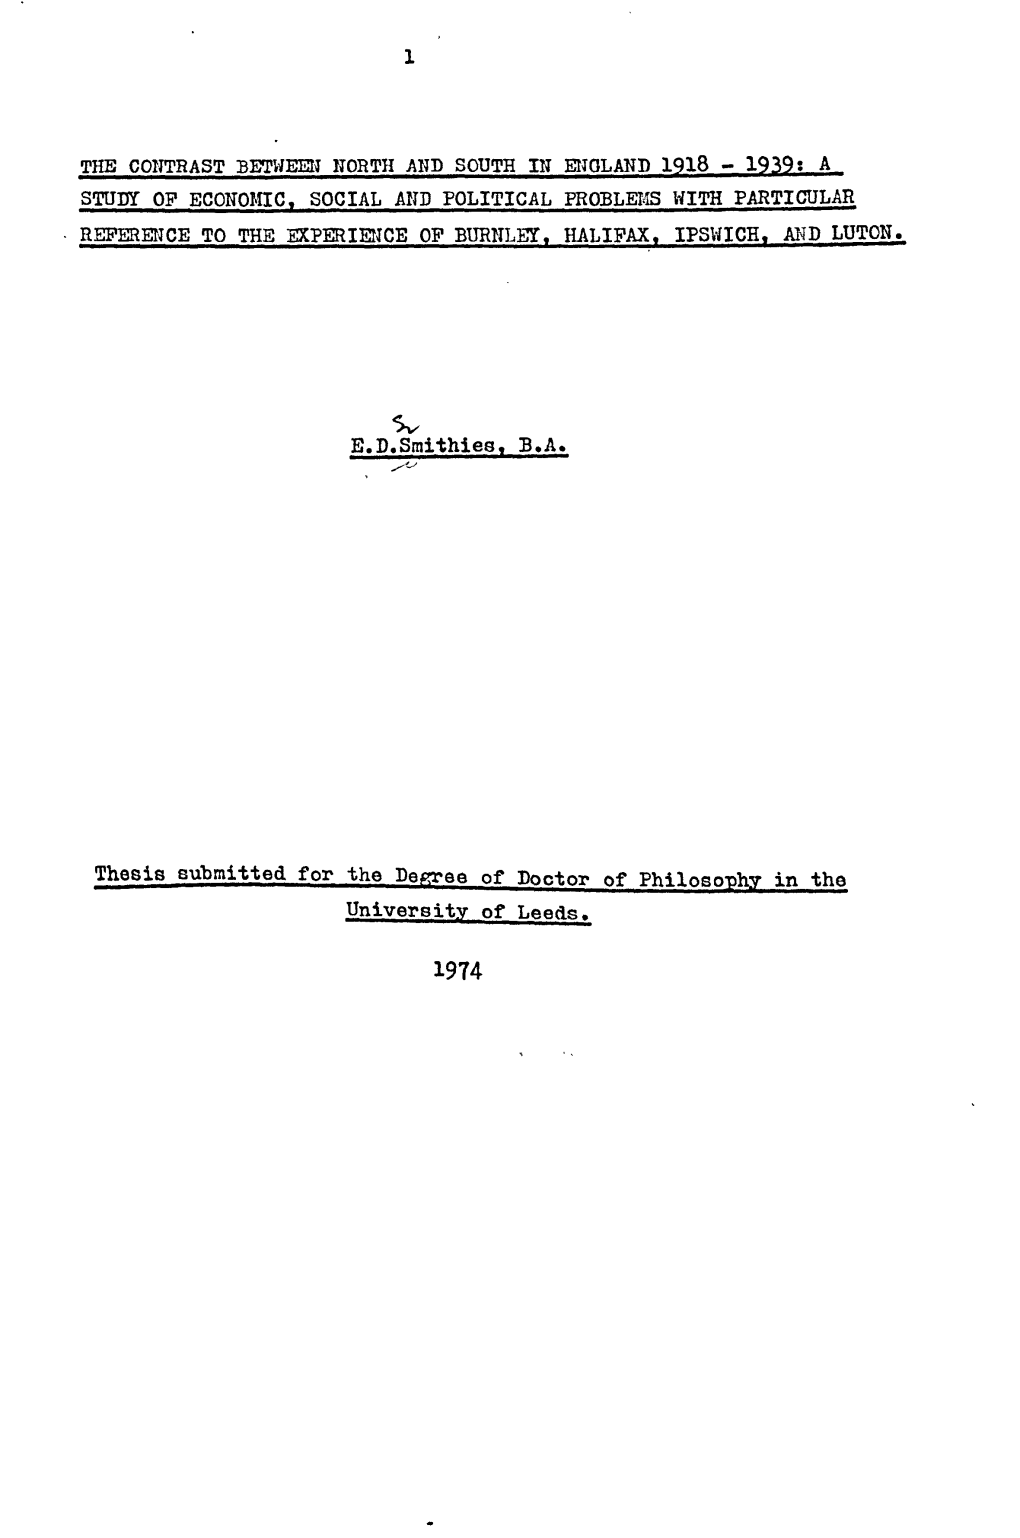 E. D. Smithies, B. A. Thesis Submitted for the Degree of Doctor Of